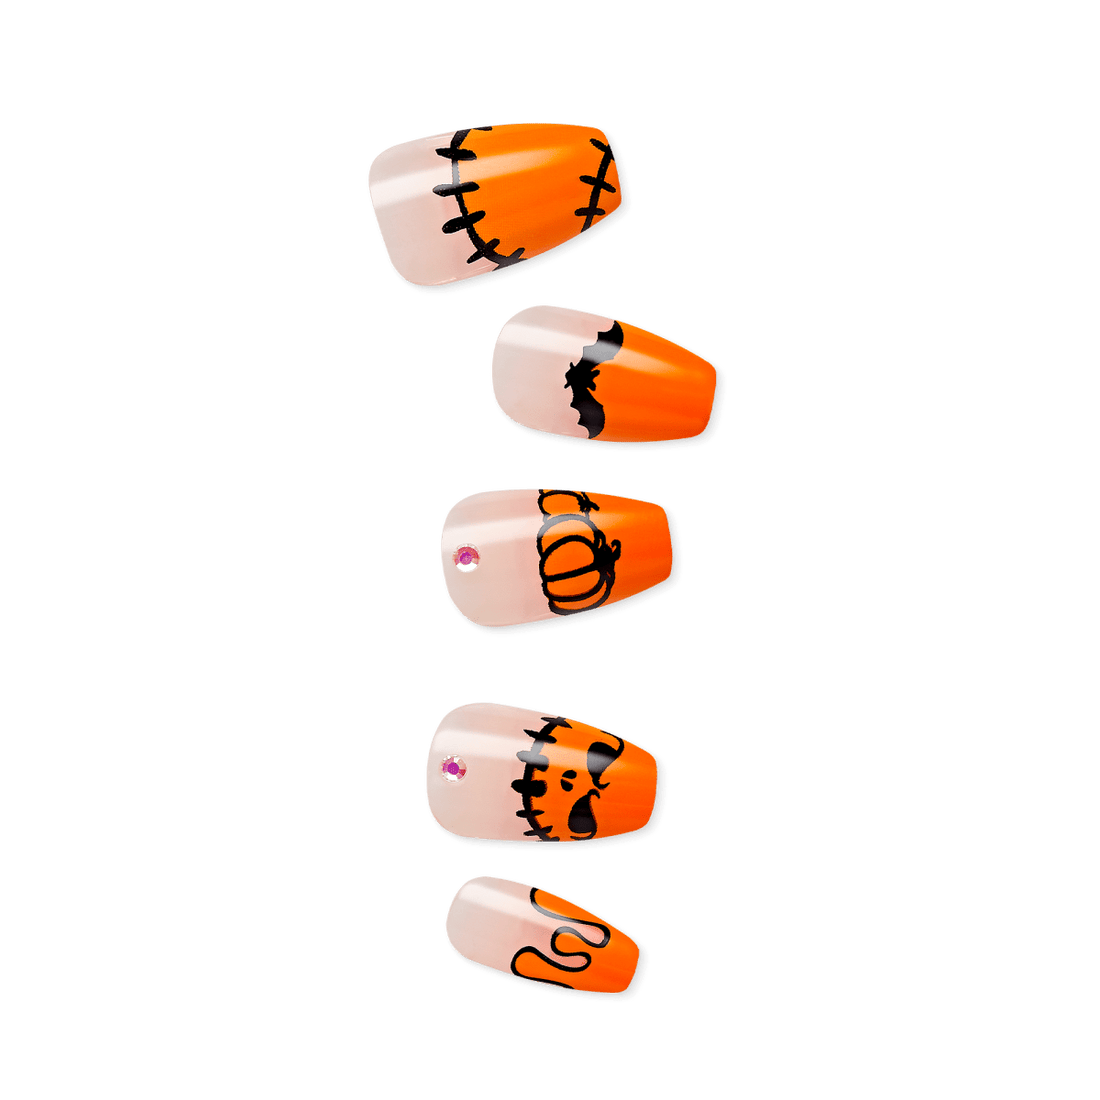 imPRESS nails in short coffin shapes, all in nude and orange coloring with varying halloween designs